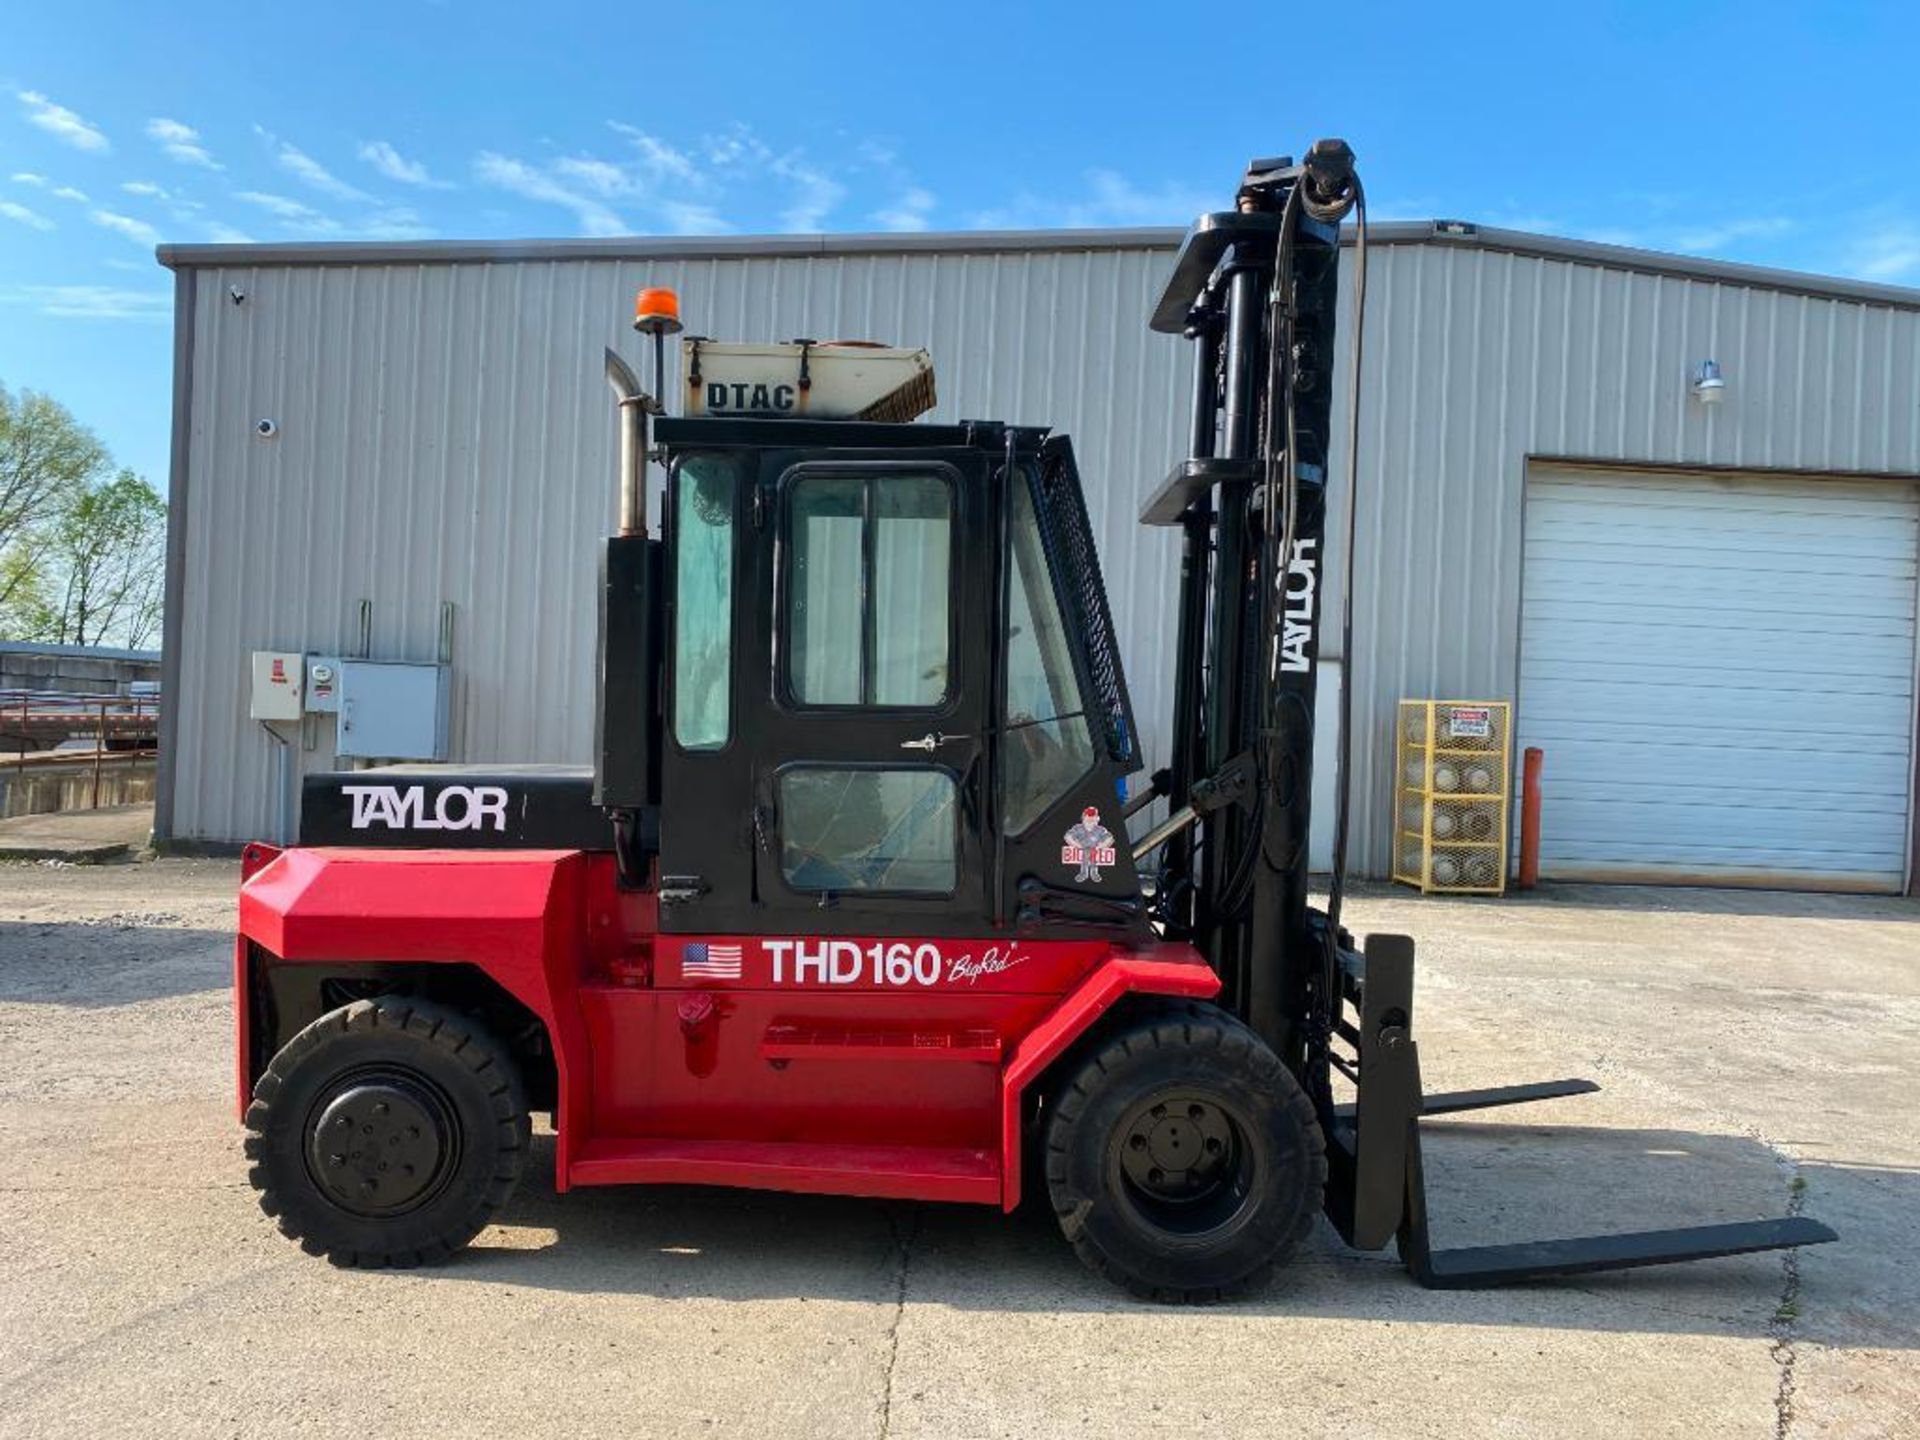 Taylor 16,000-LB. Capacity Forklift, Model THD160, S/N SC832310, Diesel, Dual Pneumatic Drive Tires, - Image 3 of 5